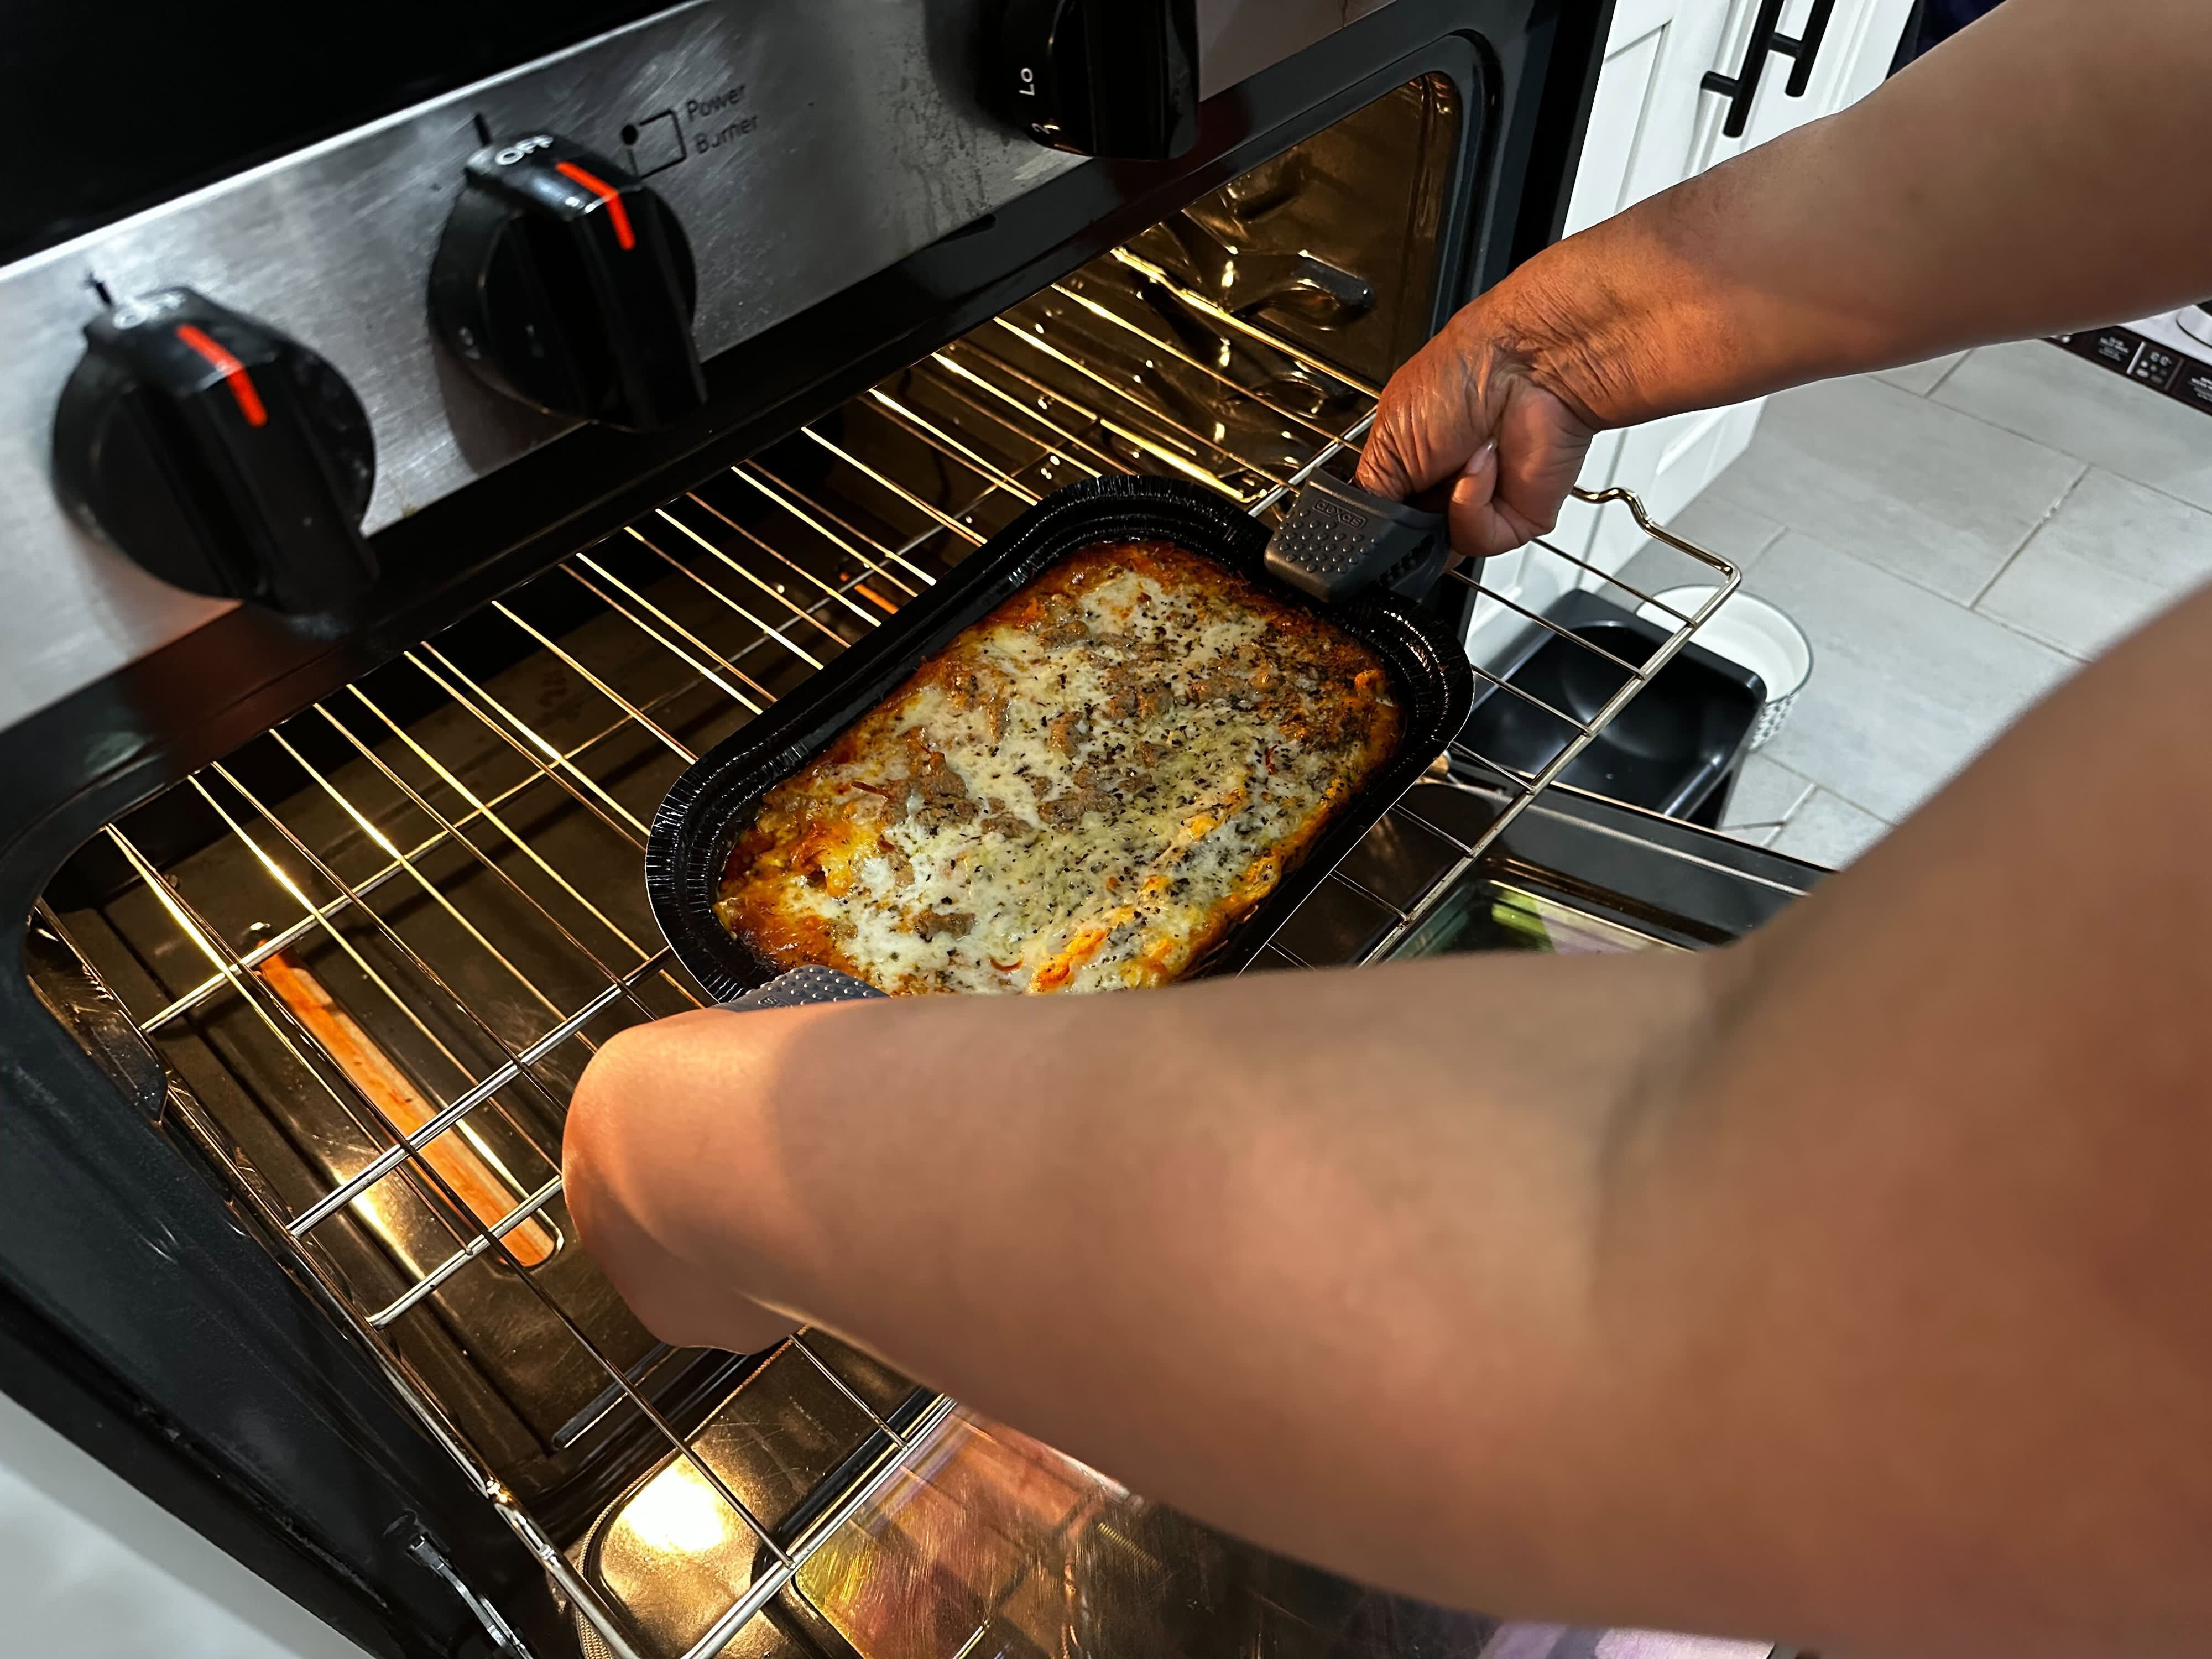 OXO Oven Mitts Review